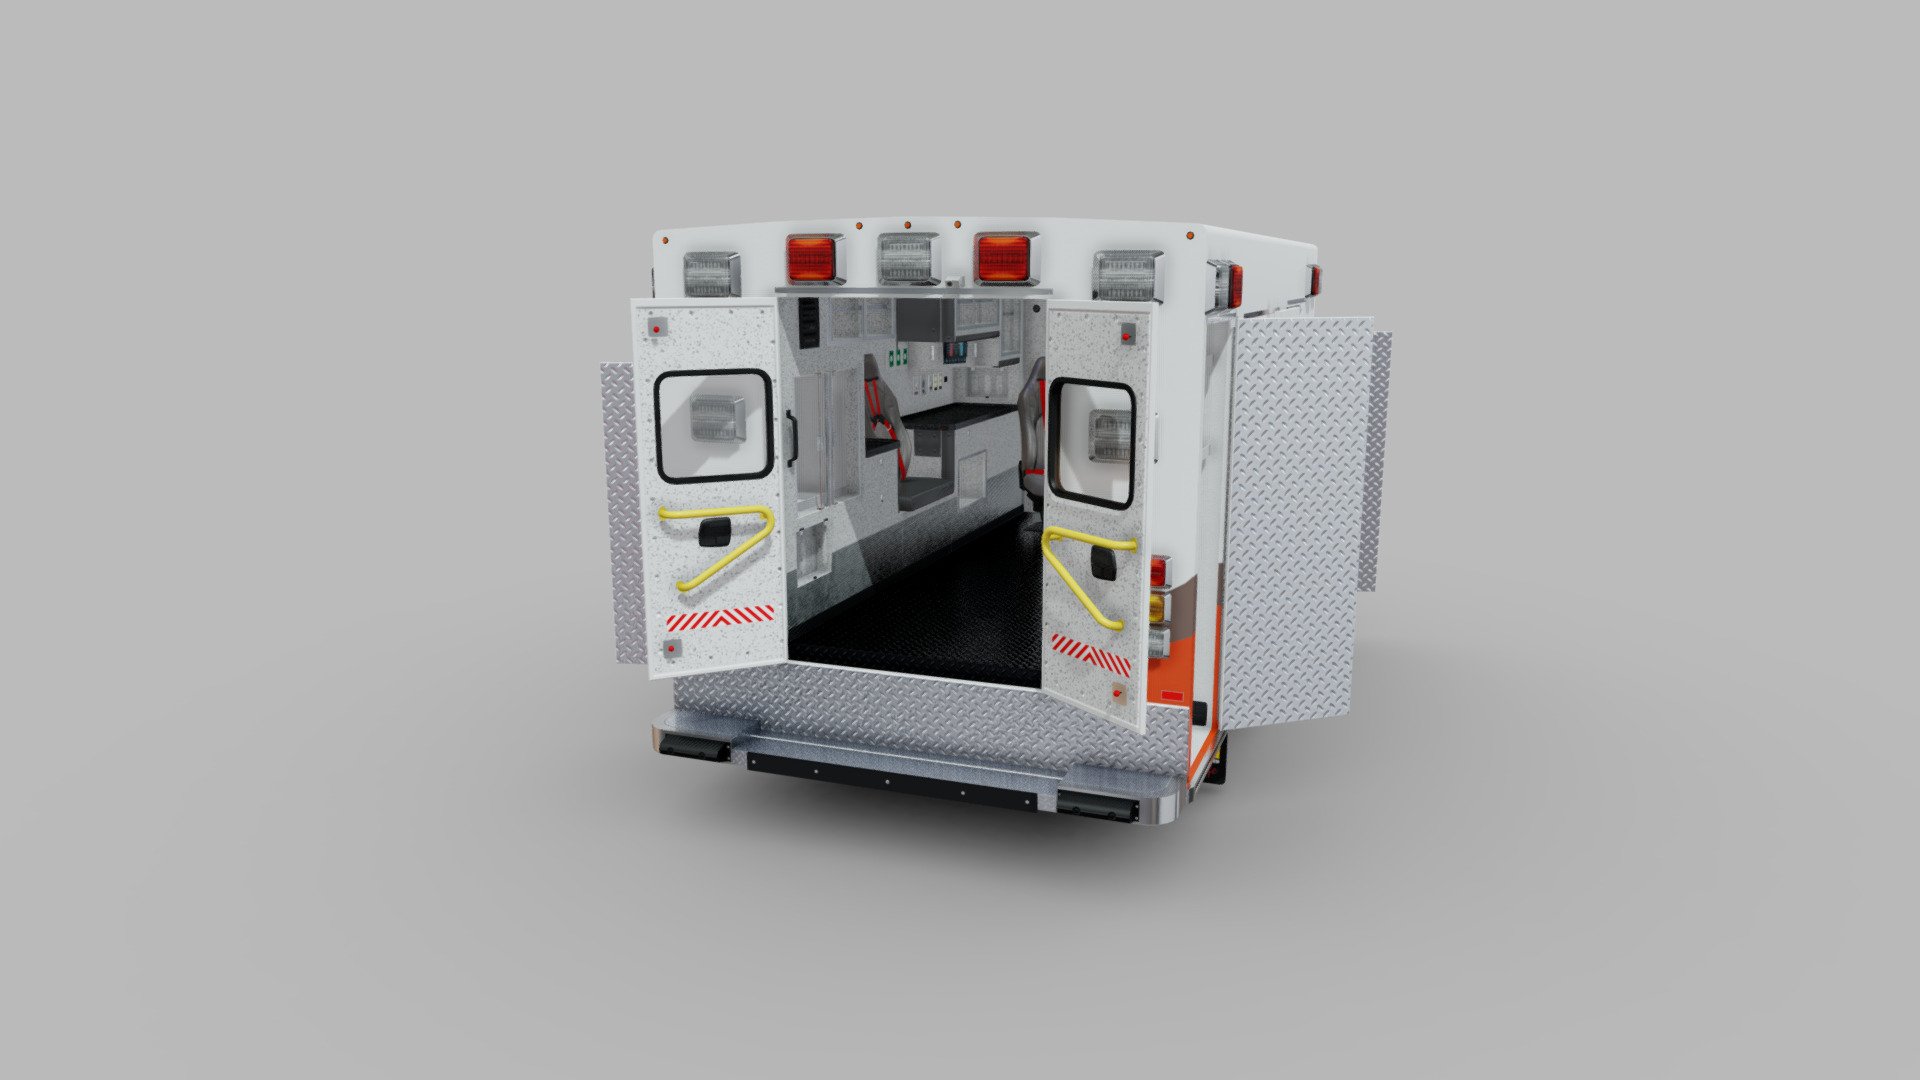 Braun ambulance 3D model displaying the exterior and interior design of this emergency vehicle, showcasing the structured layout and functional design elements common in modern emergency medical service vehicles. The model provides a comprehensive view of the ambulance, reflecting the real-world appearance and functionality that these vehicles carry in their day-to-day operation in emergency medical response scenarios 3d model